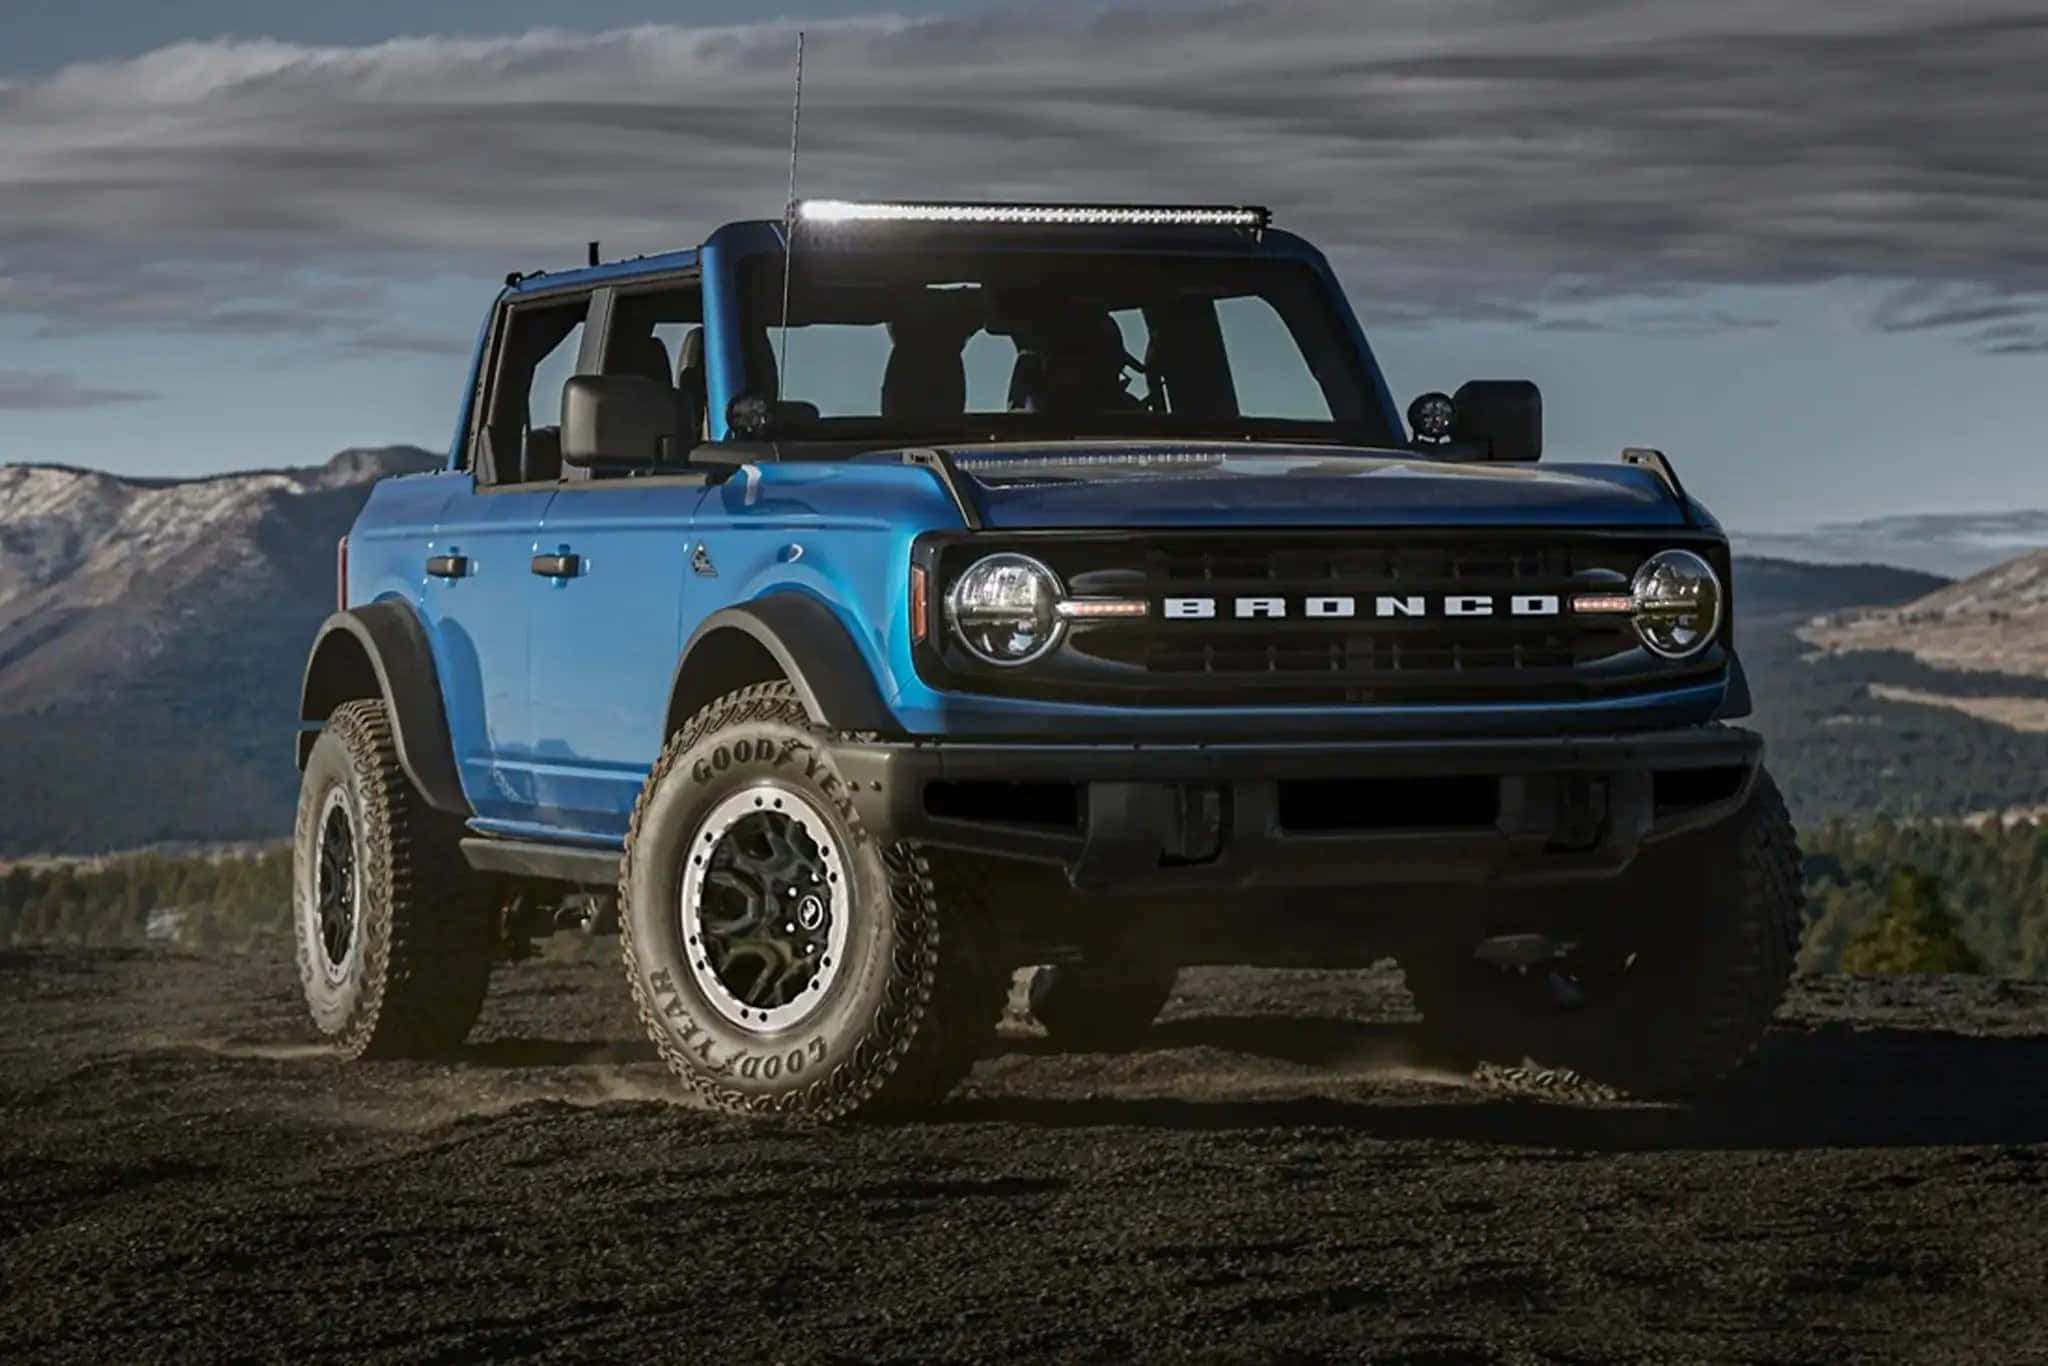 Get Ready to Rumble: The Iconic Ford Bronco